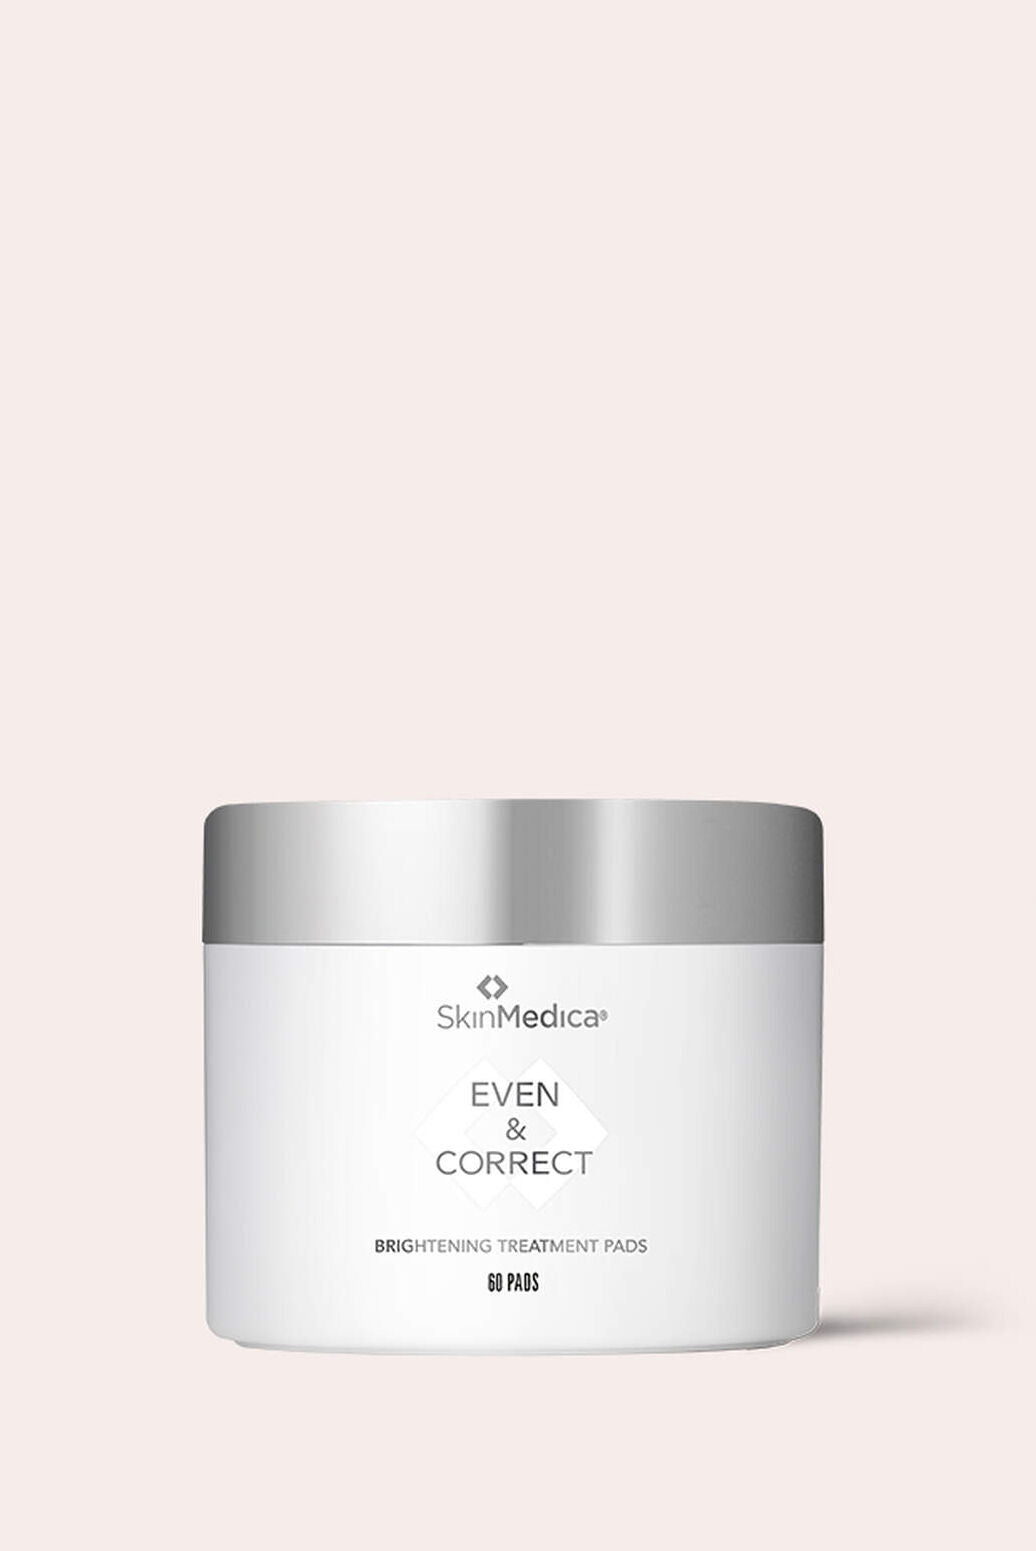 Even & Correct Brightening Treatment Pads